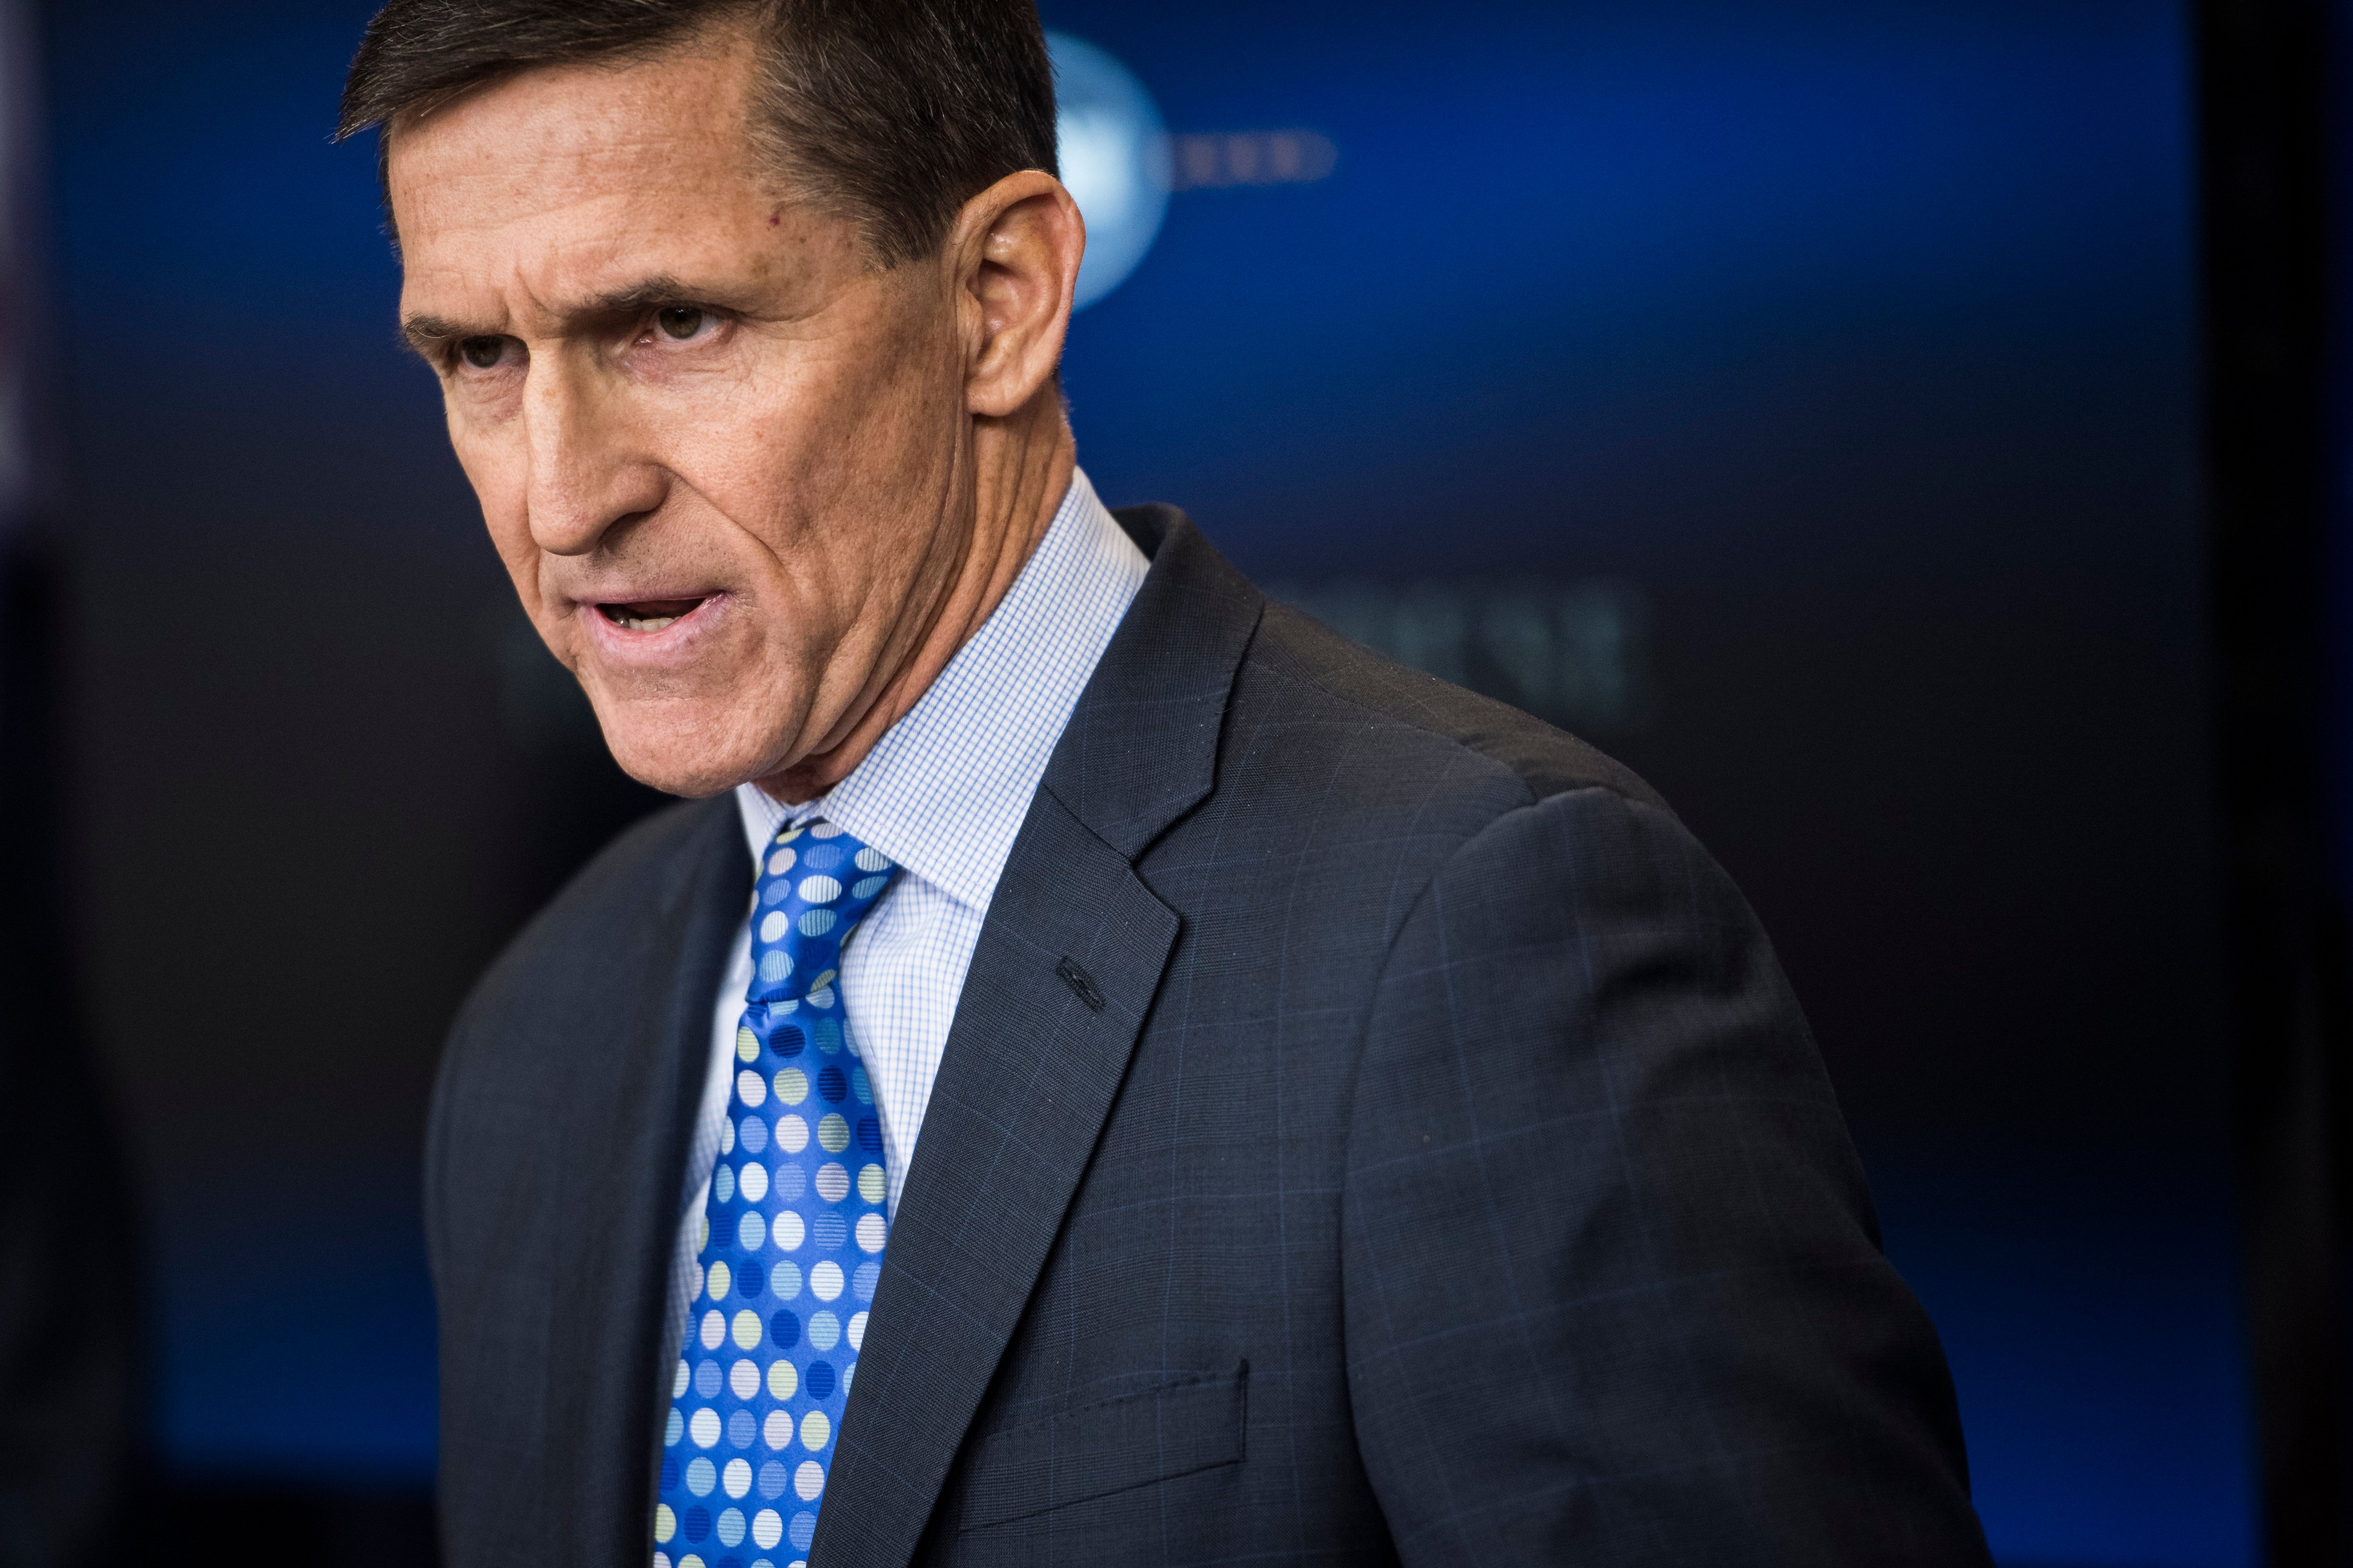 Former National Security Adviser Michael Flynn speaks in the James S. Brady Press Briefing Room during the daily news briefing at the White House in Washington, D.C. on Feb. 1, 2017. (Jabin Botsford—The Washington Post/Getty Images)